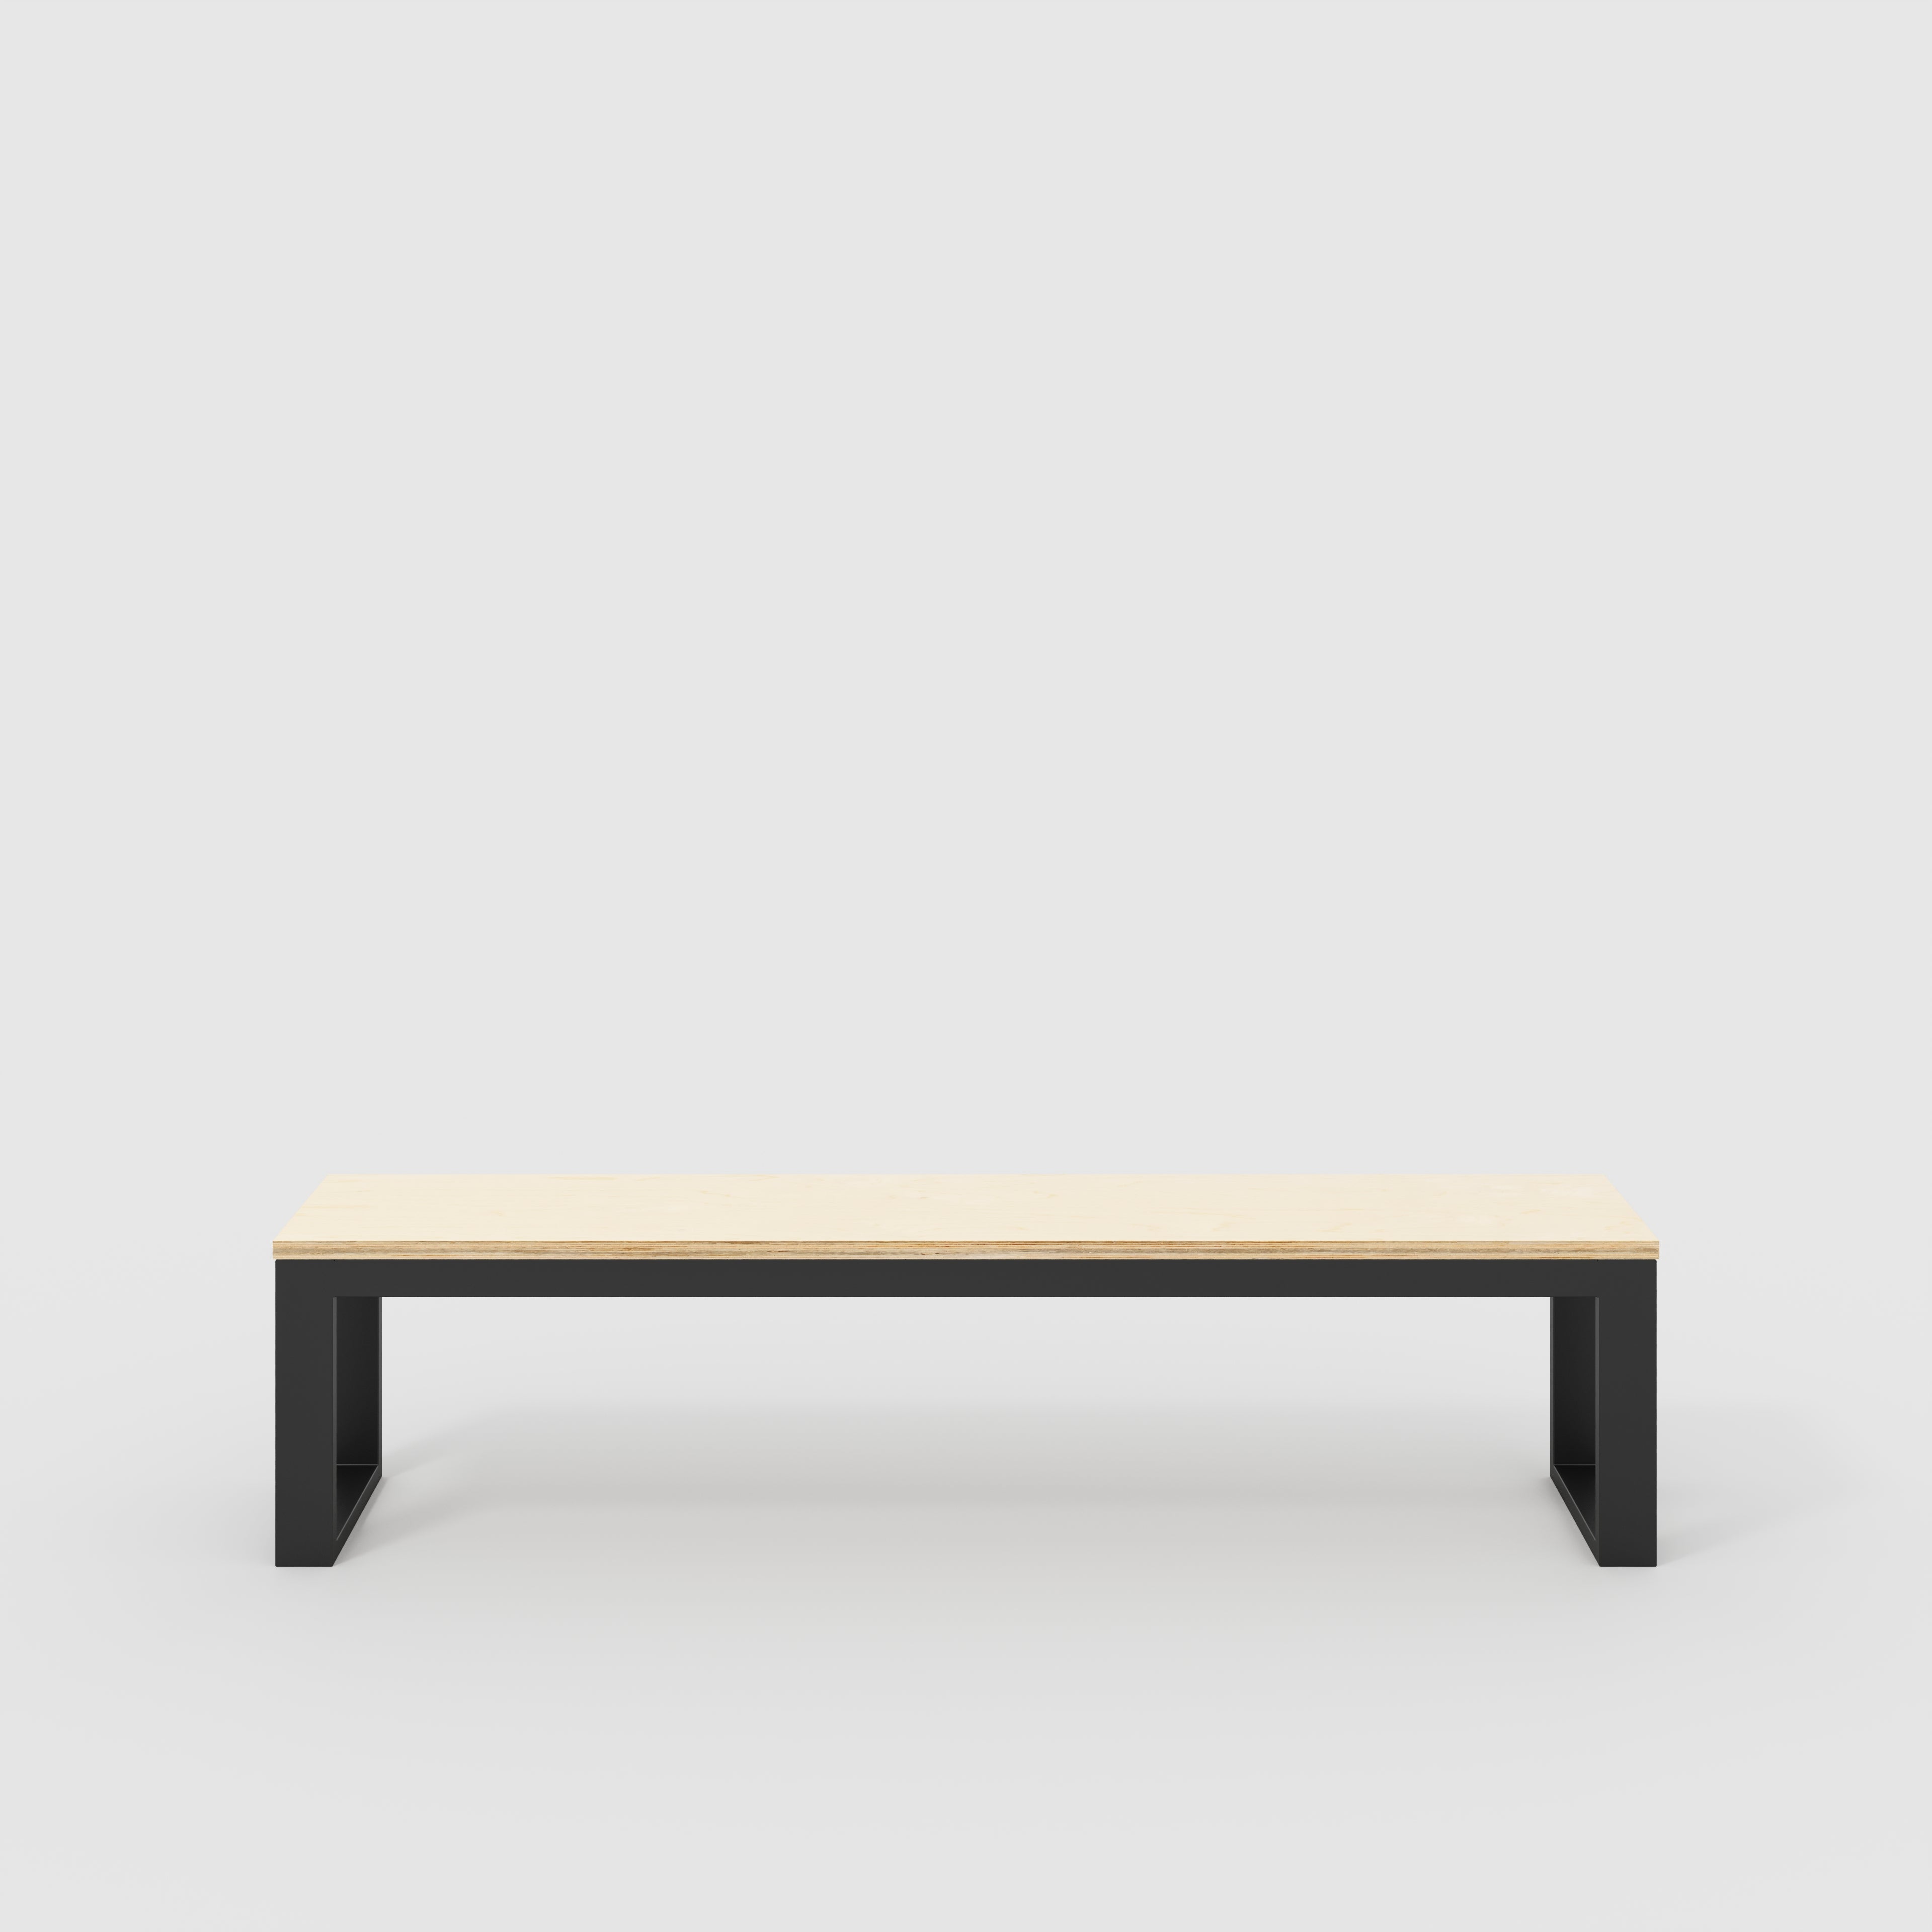 Bench Seat with Black Industrial Frame - Plywood Birch - 1800(w) x 325(d)